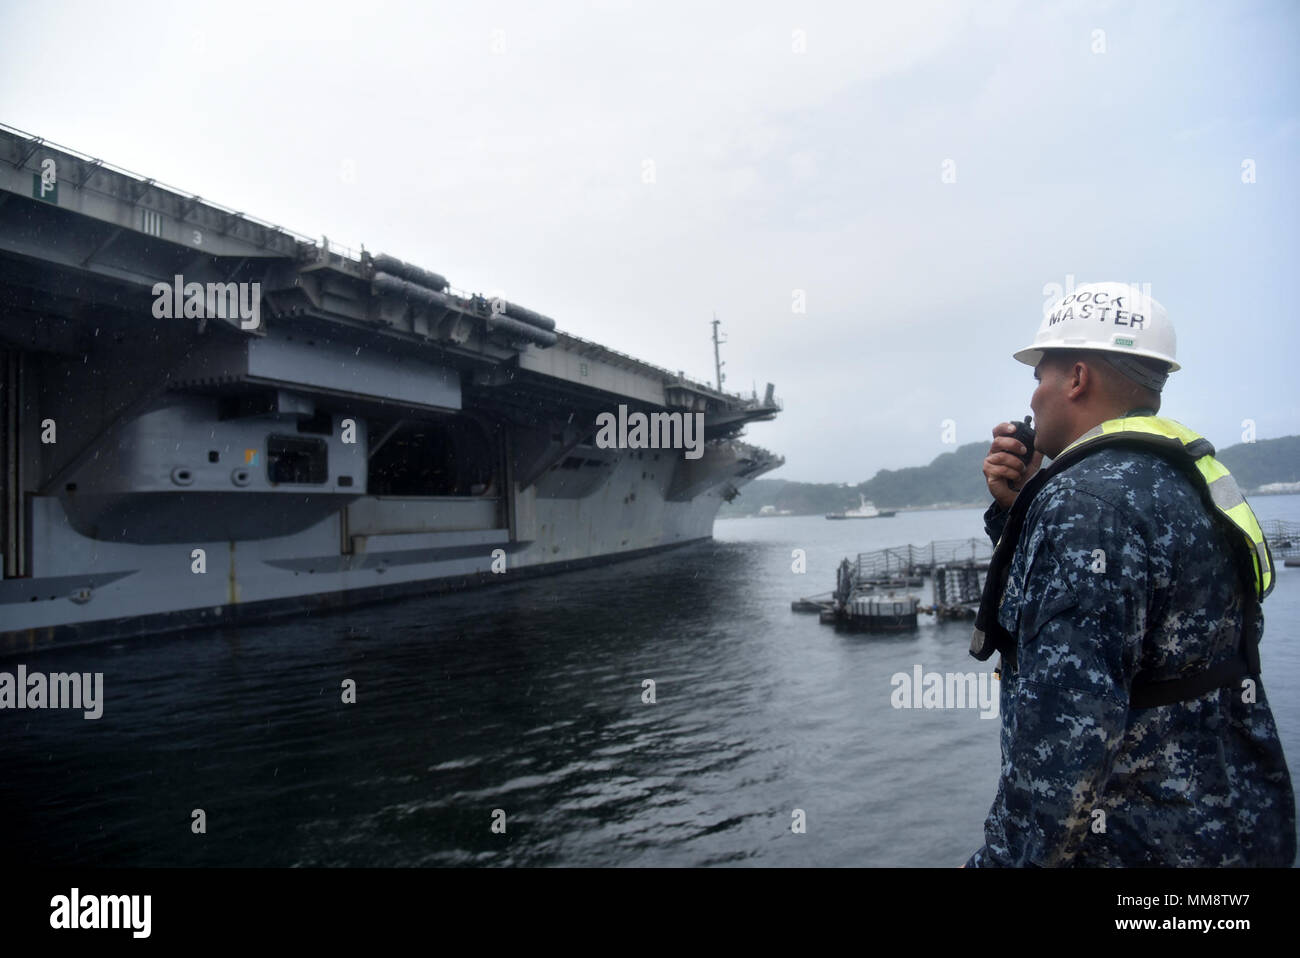 170908-N-JT445-034 YOKOSUKA, Japan (Sept. 8, 2017) Boatswain’s Mate 2nd Class Akran Omar from Fleet Activities (FLEACT) Yokosuka’s port operations, oversees the departure of USS Ronald Reagan (CVN 76), as the ship gets underway from FLEACT Yokosuka. Ronald Reagan is the flagship of Carrier Strike Group 5, providing a combat-ready force that protects and defends the collective maritime interests of its allies and partners in the Indo-Asia-Pacific region. FLEACT Yokosuka provides, maintains, and operates base facilities and services in support of 7th Fleet’s forward-deployed naval forces, 71 ten Stock Photo